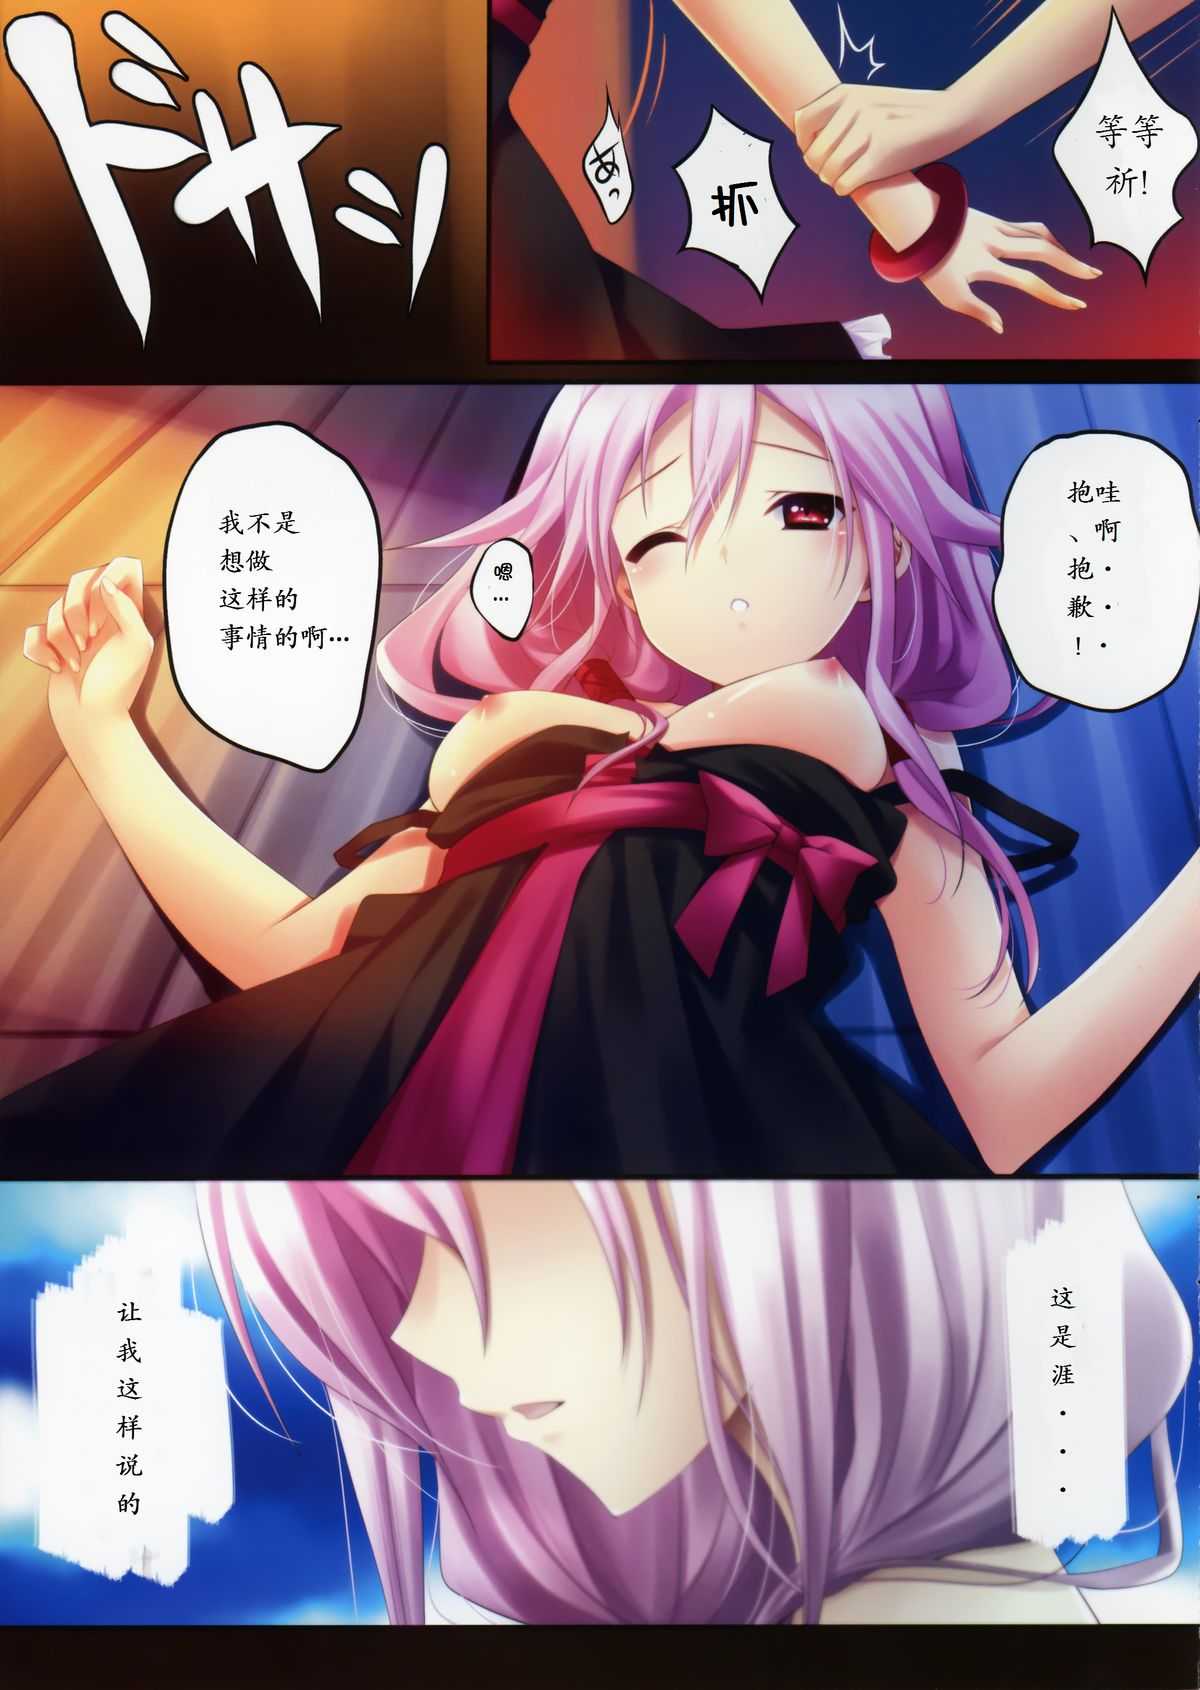 (C81) [Radiant, Spread-Pink (Yuuki Makoto, Zinno)] Guilty (Guilty Crown, Super Soniko) [Chinese] (C81) [Radiant, Spread-Pink (悠樹真琴, Zinno)] Guilty (ギルティクラウン, すーぱーそに子) [中文翻譯]